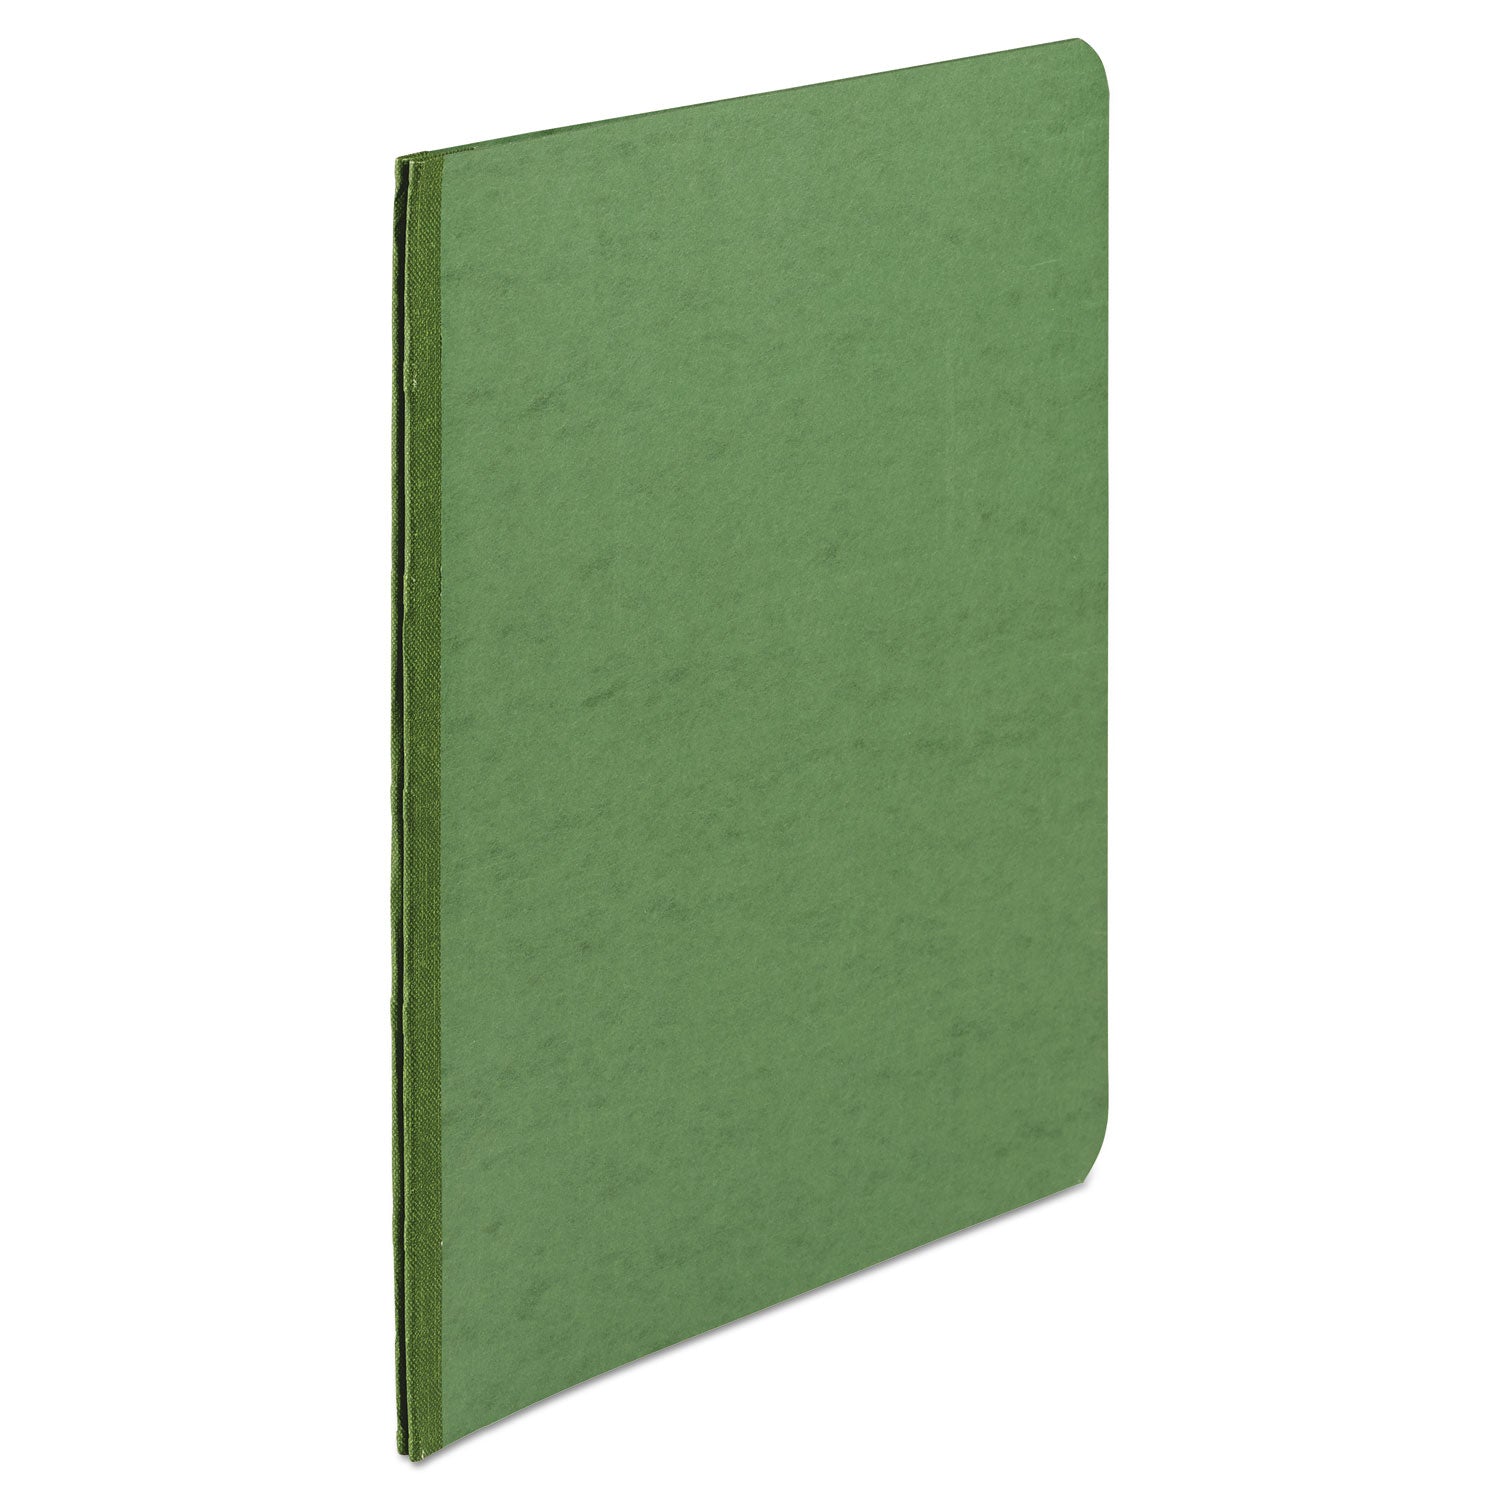 PRESSTEX Report Cover with Tyvek Reinforced Hinge, Side Bound, 2-Piece Prong Fastener, 8.5 x 11, 3" Capacity, Dark Green - 